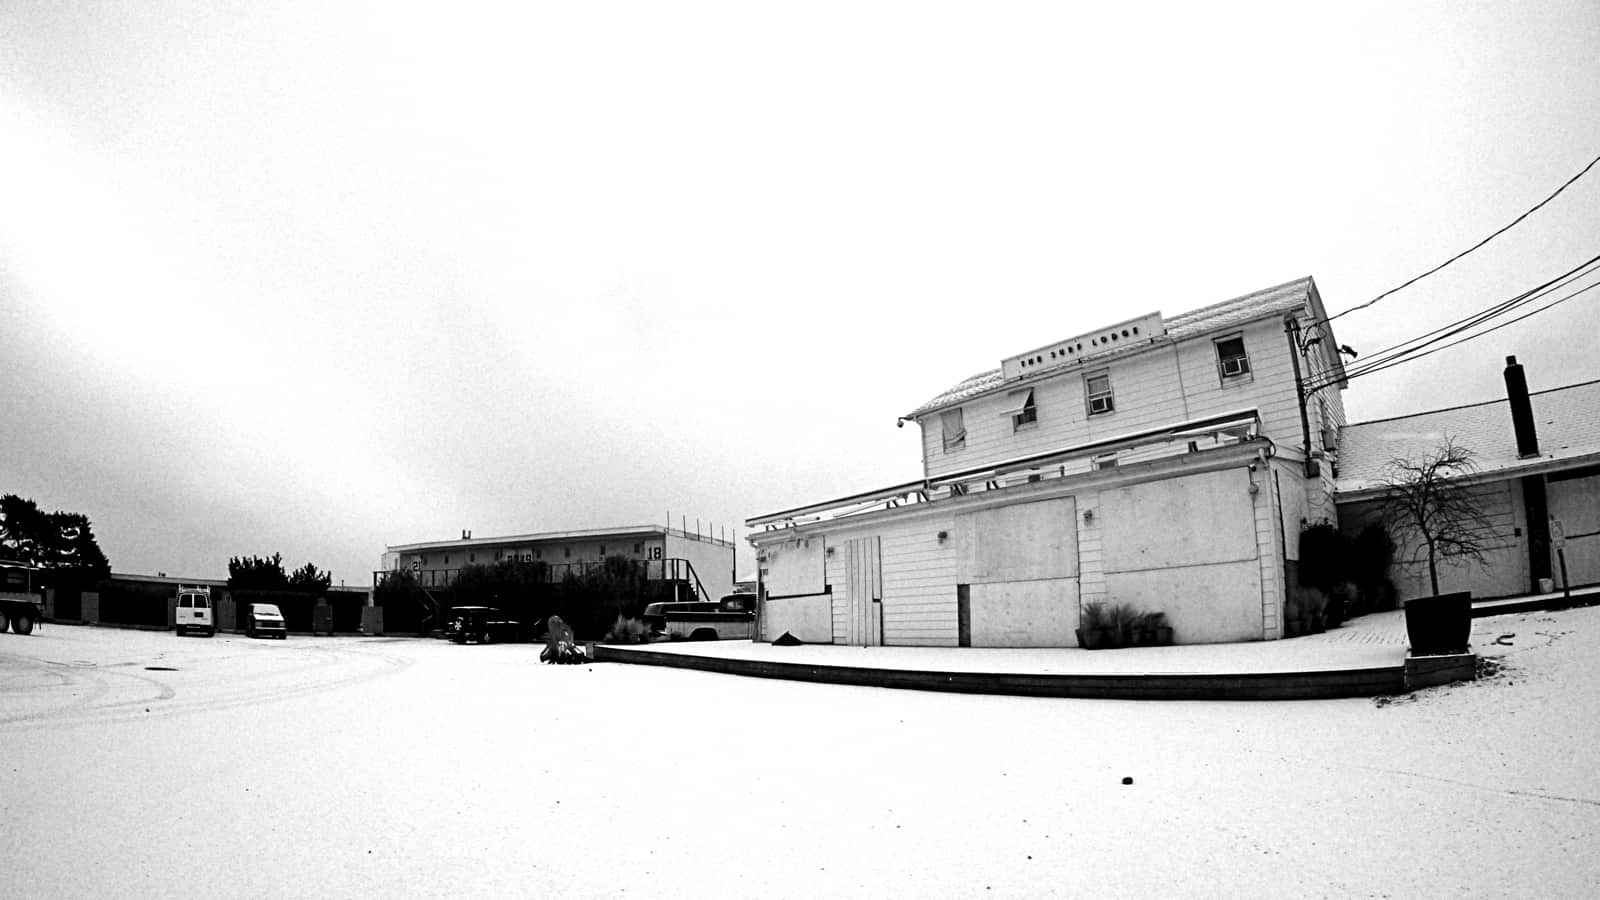 White snow covers white sand in the Surf Lodge parking lot, Montauk NY, photo by Sailing Montauk